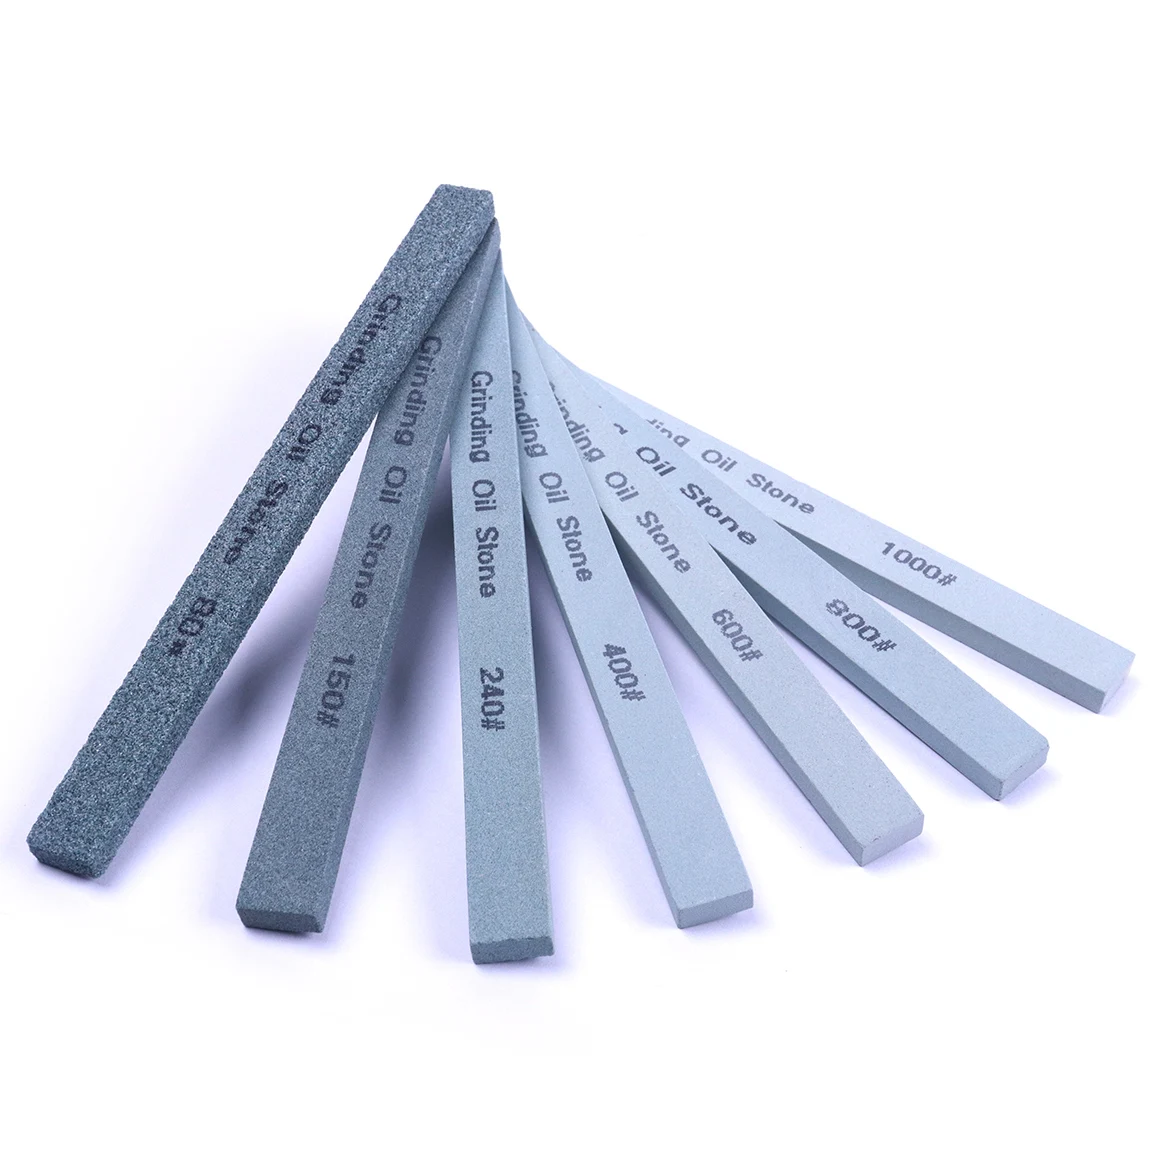 10Pcs Green Silicone Carbide Sharpening Whetstone Polishing Grinding Oil Stone 80#-1000# Grit Grinding Stone 6 pieces 3000 grit ruby knife sharpener abrasives polishing whetstone sharpening grinding stones professional grindstone